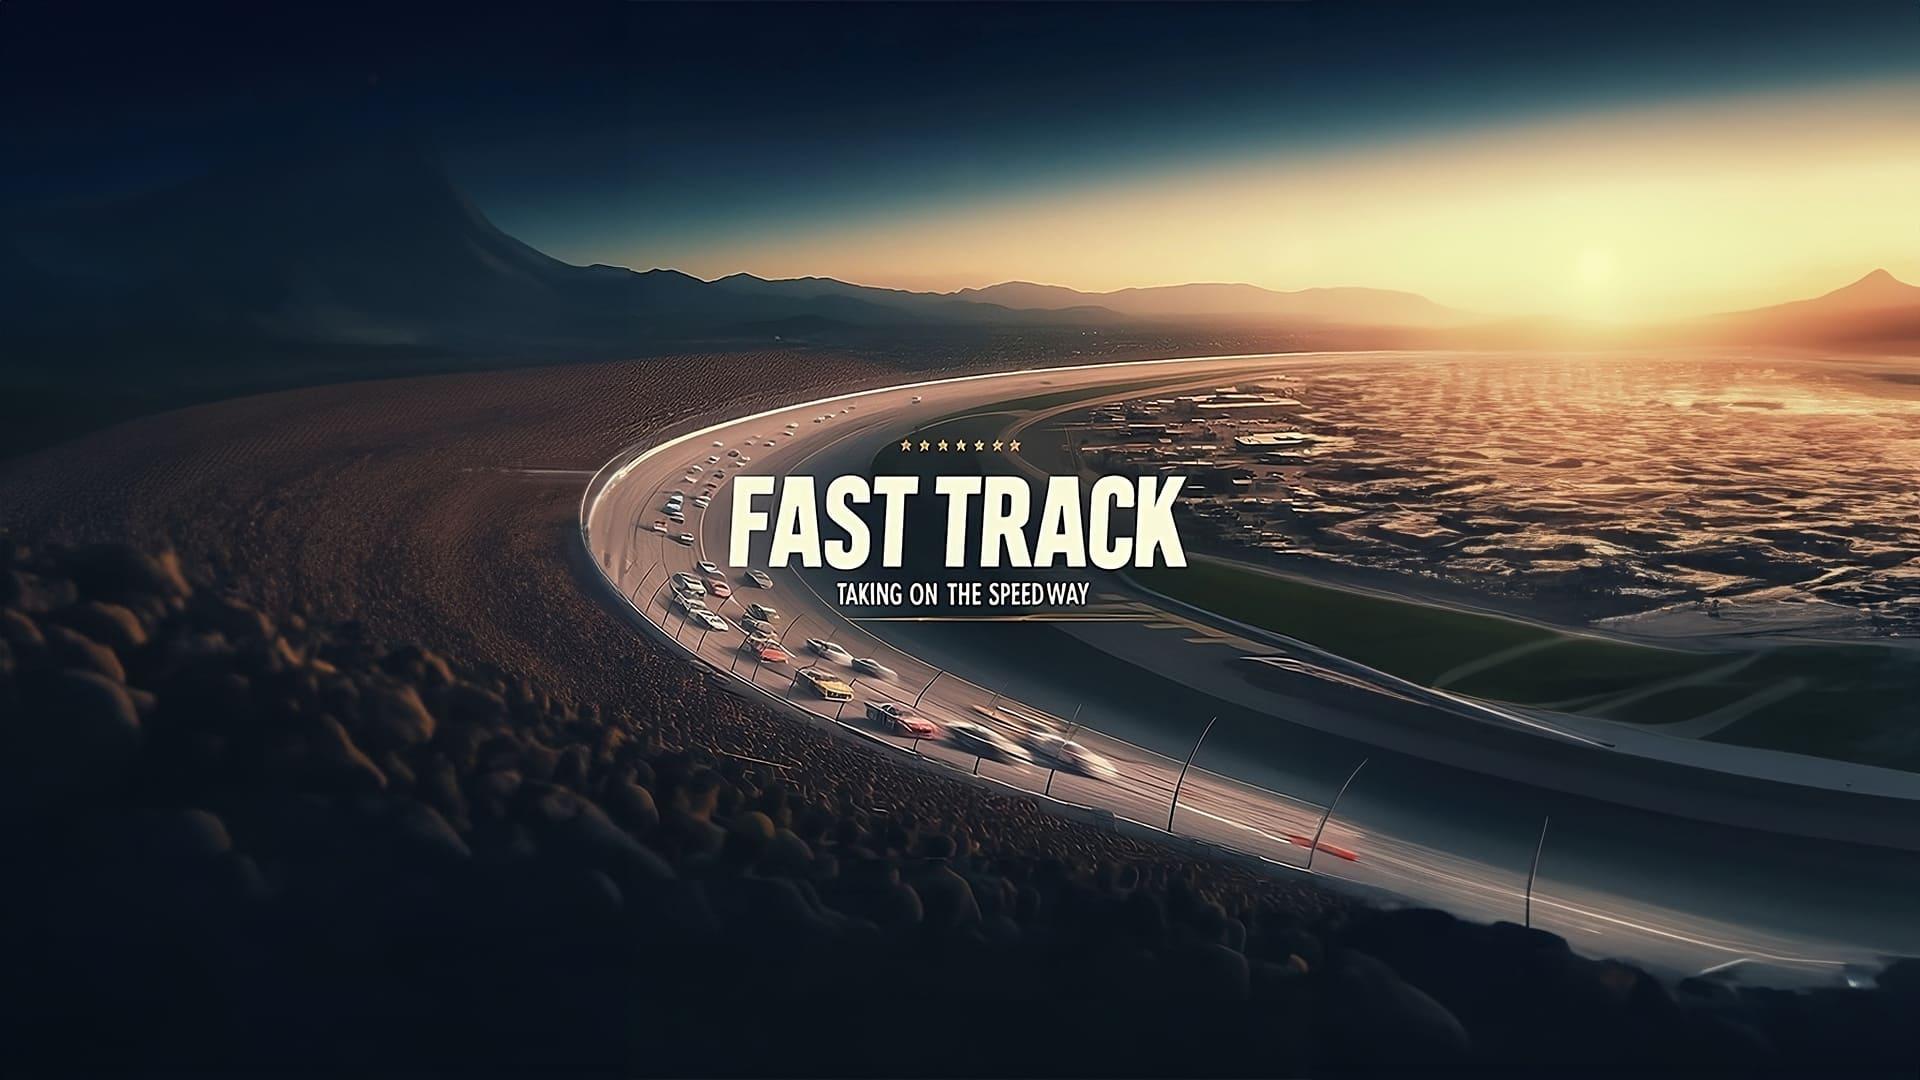 Fast Track: Taking on the Speedway backdrop